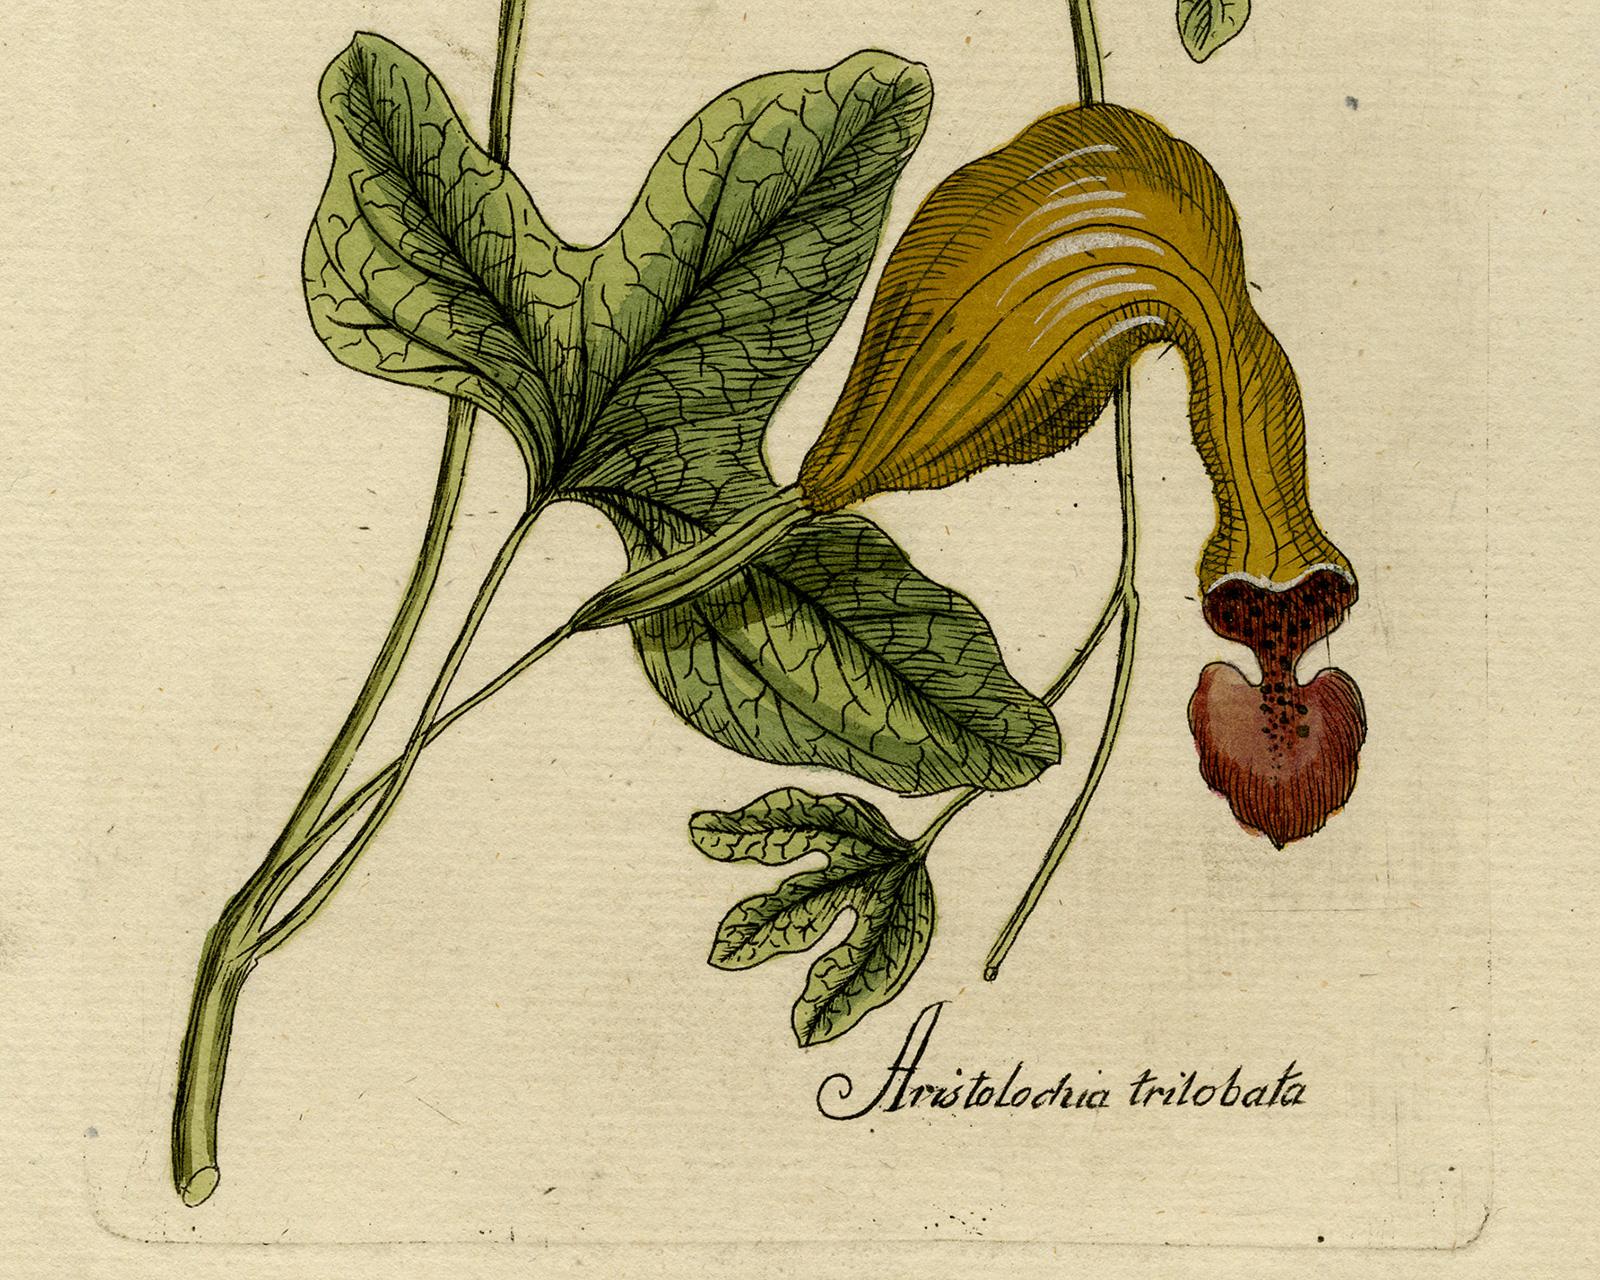 Dutchman's Pipe from Medicinal Plants by Happe - Handcoloured engraving - 18th c - Old Masters Print by Andreas Friedrich Happe